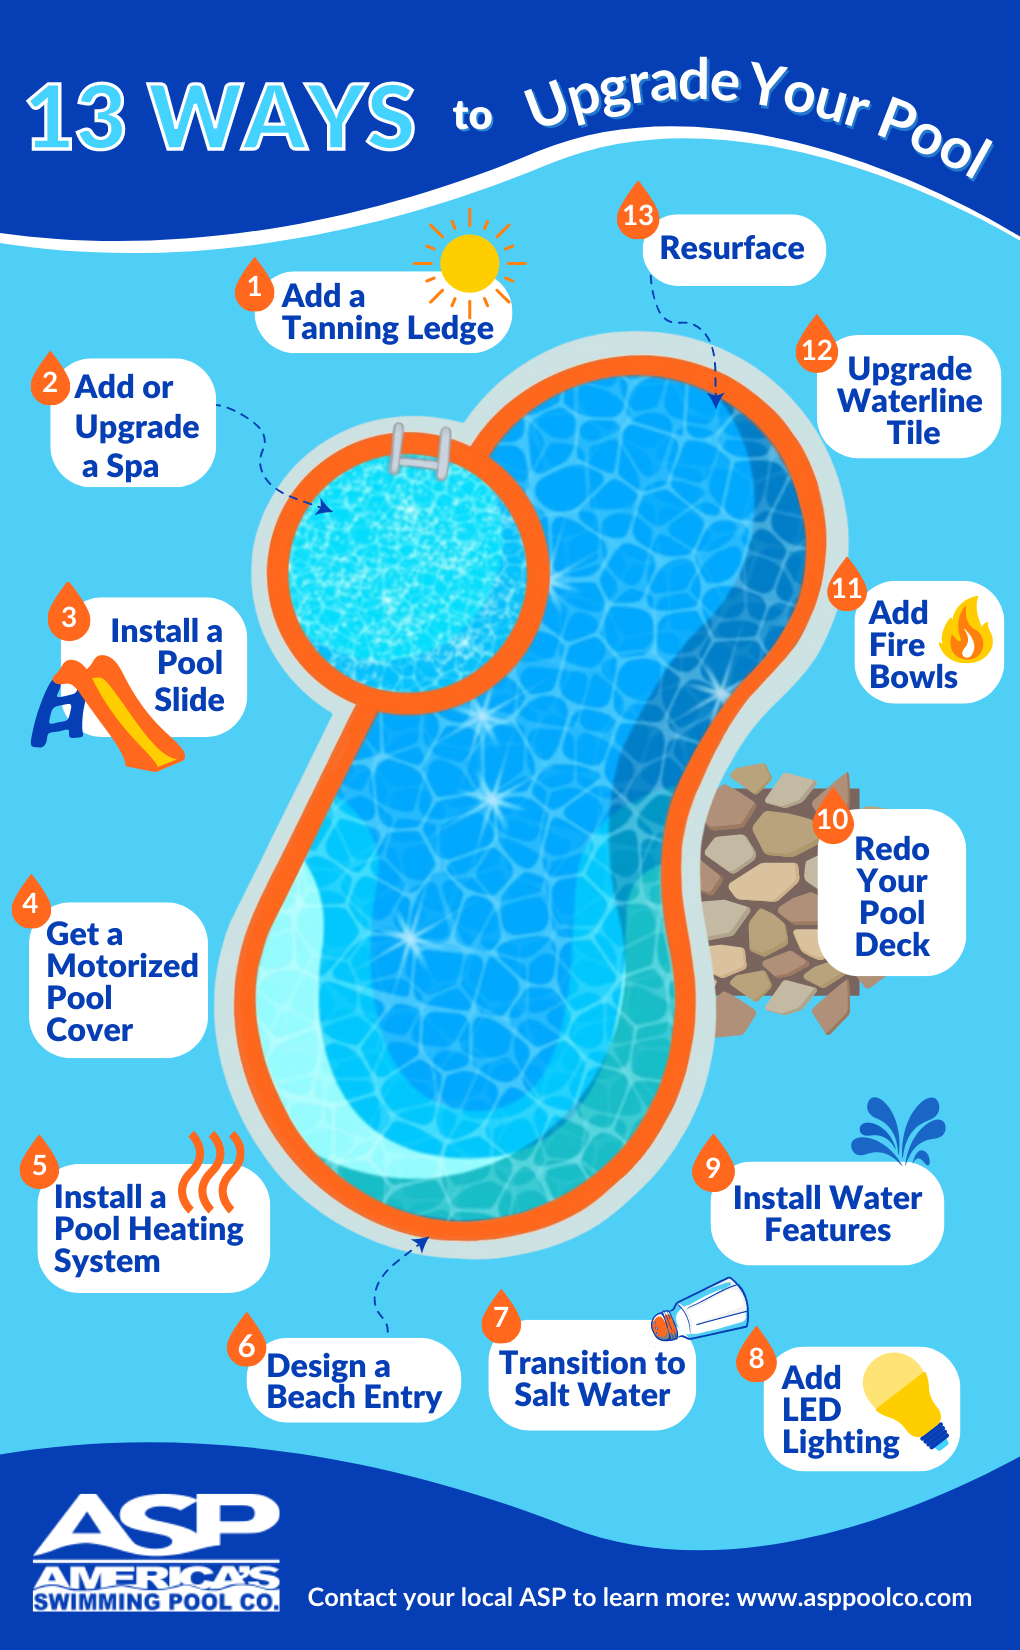 Infographic detailing 13 ways to upgrade a pool